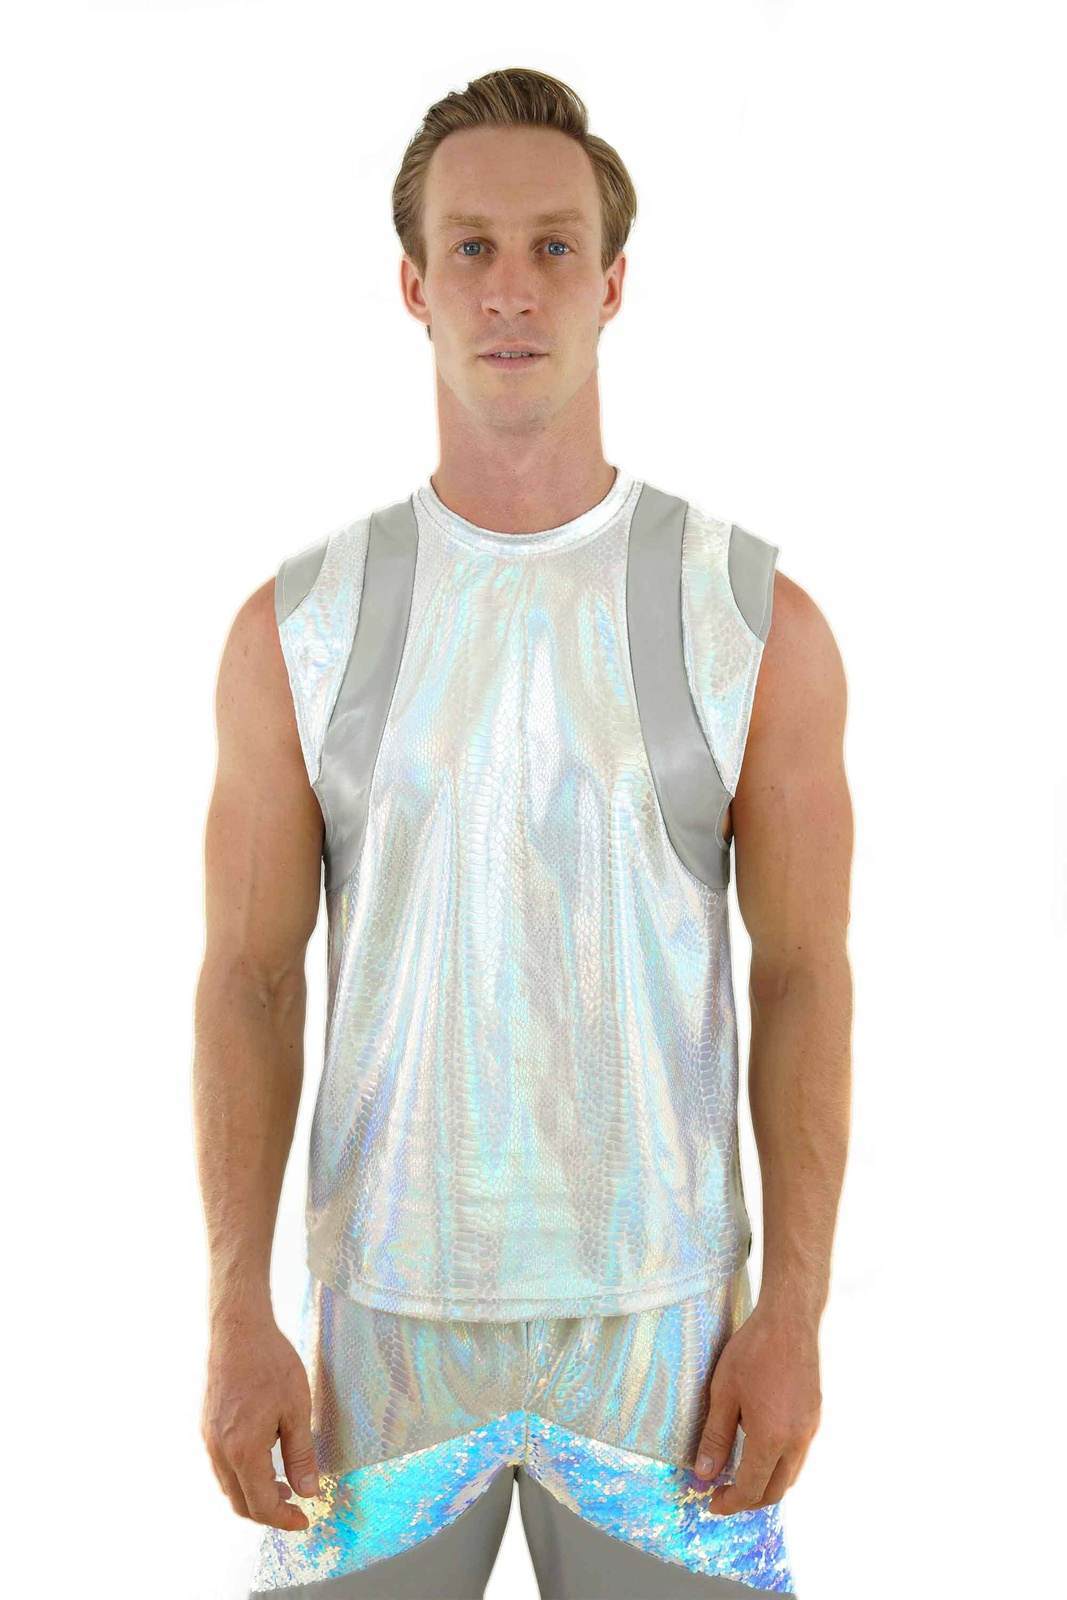 Mens Festival tank top in holographic white snake skin fabric from Love Khaos